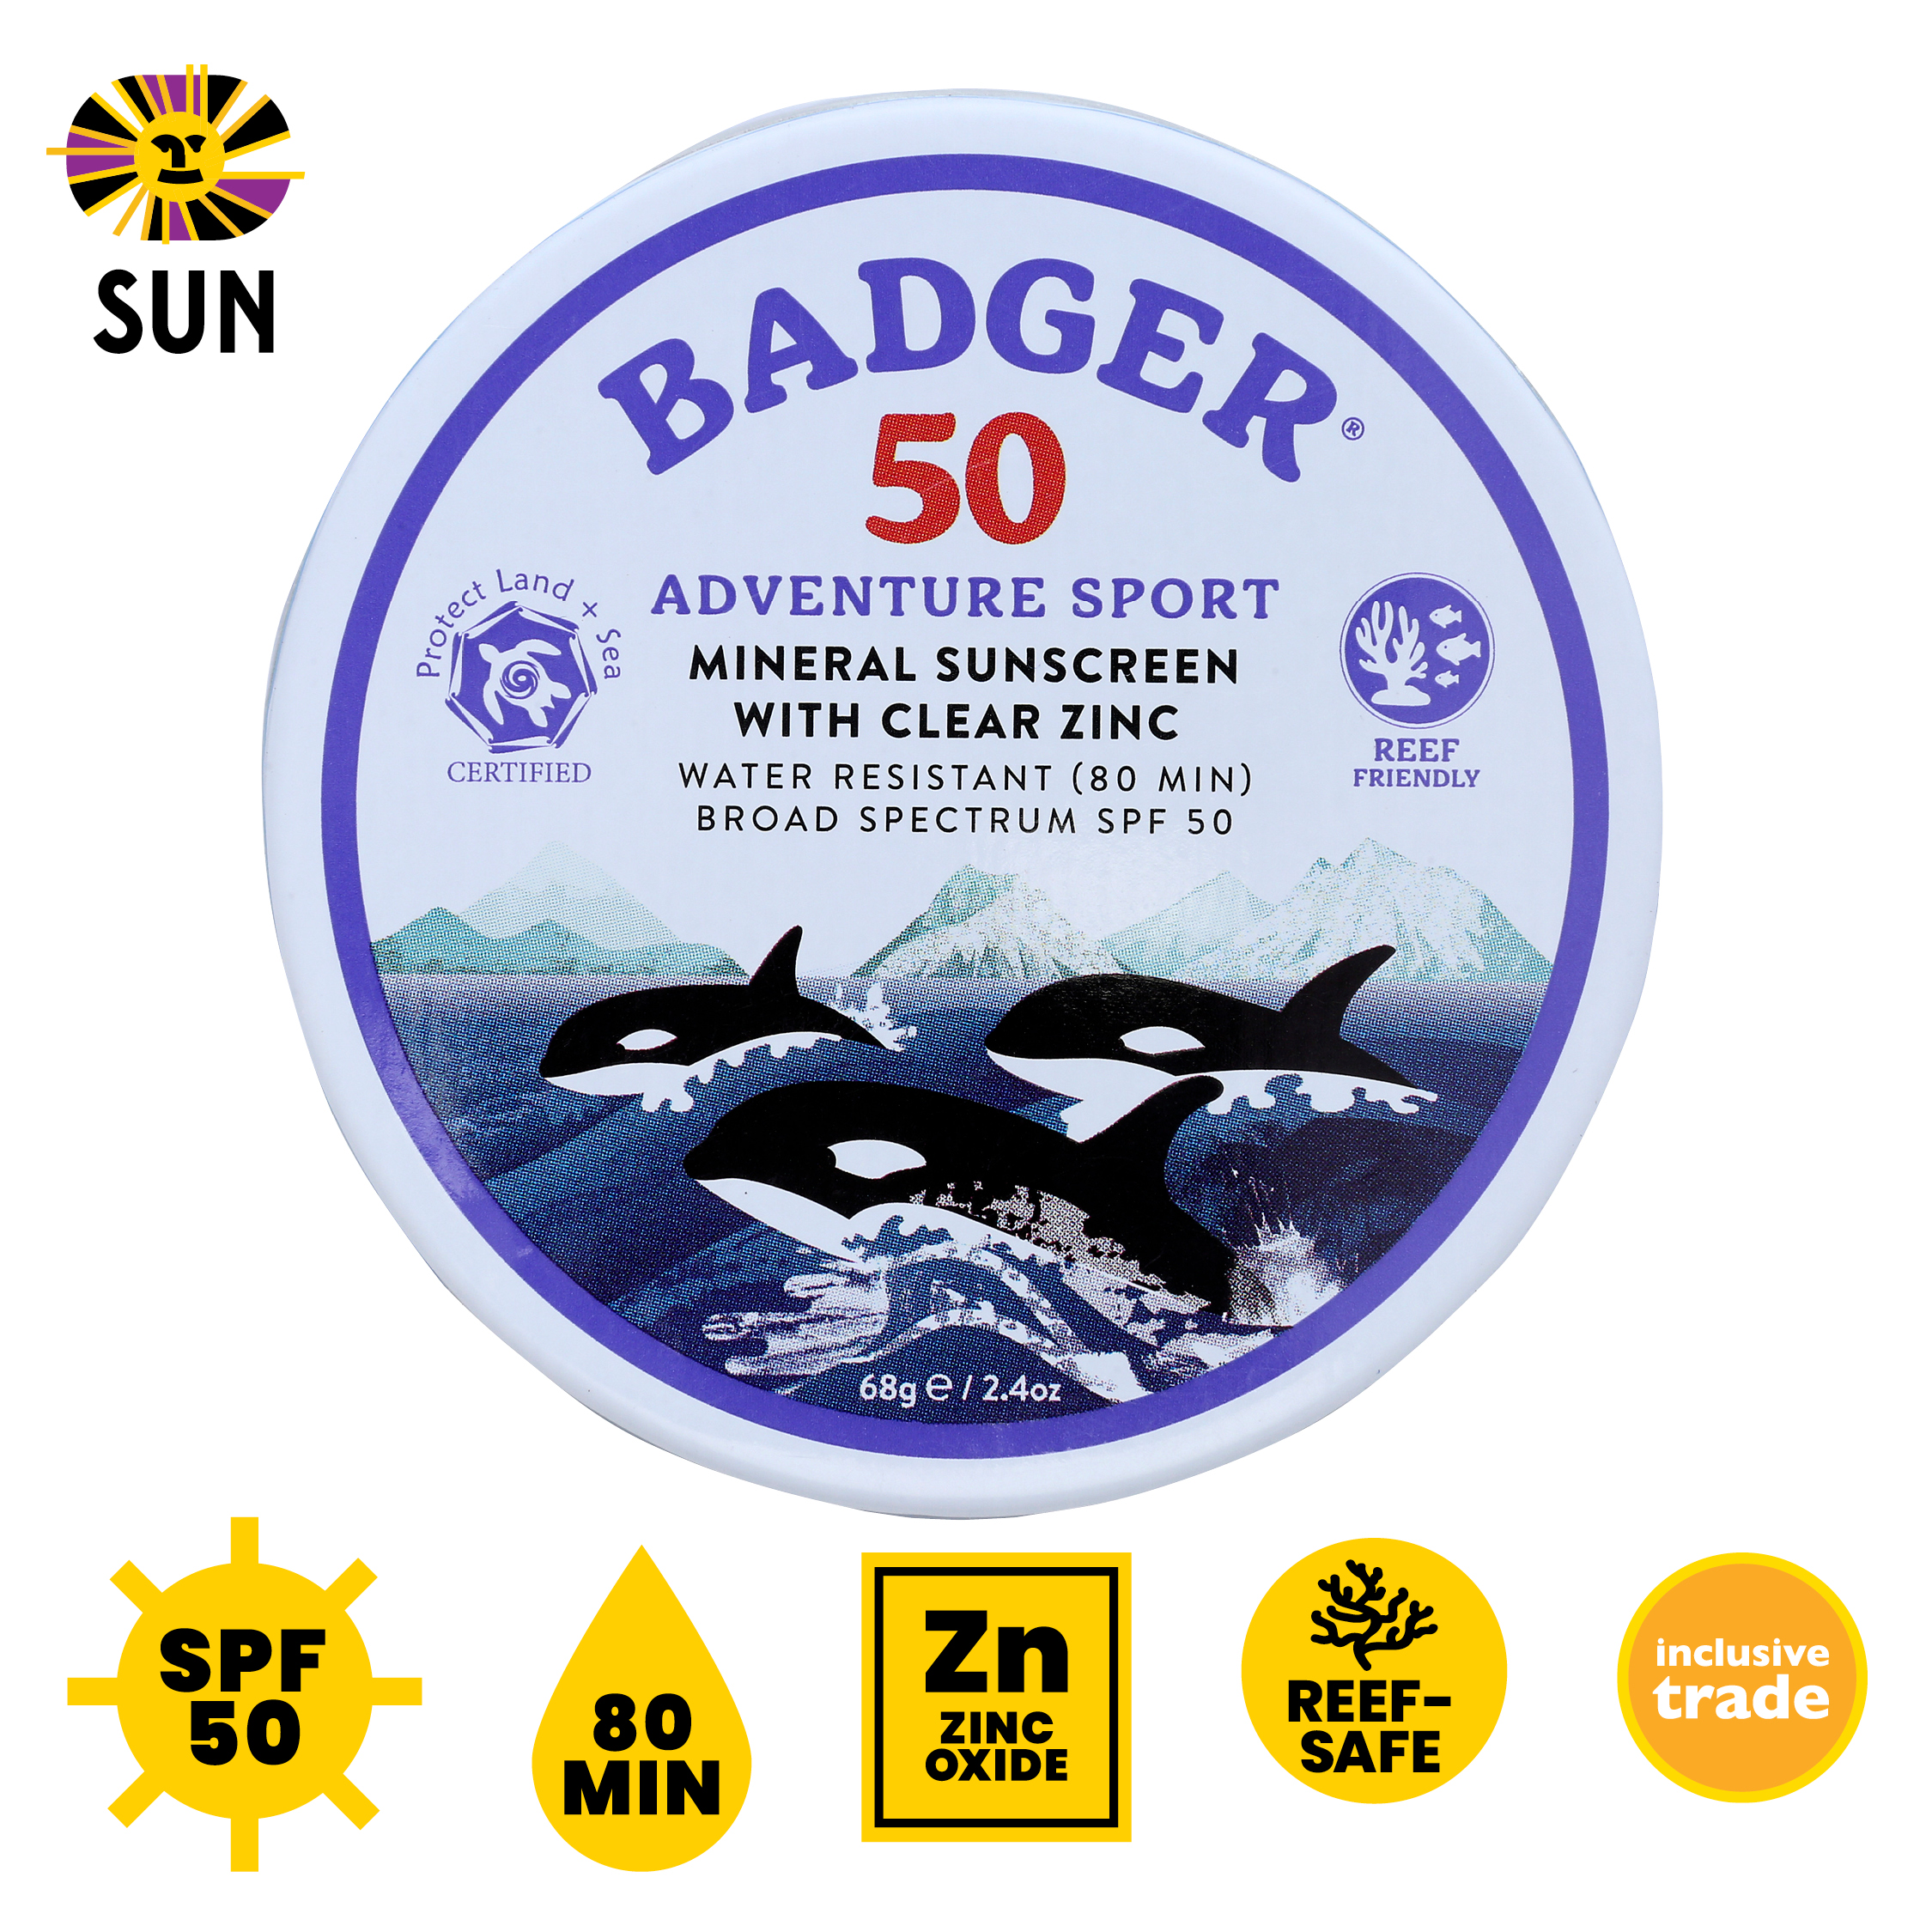 Badger SPF 50 Adventure Sport Mineral Sunscreen Unscented Plastic free